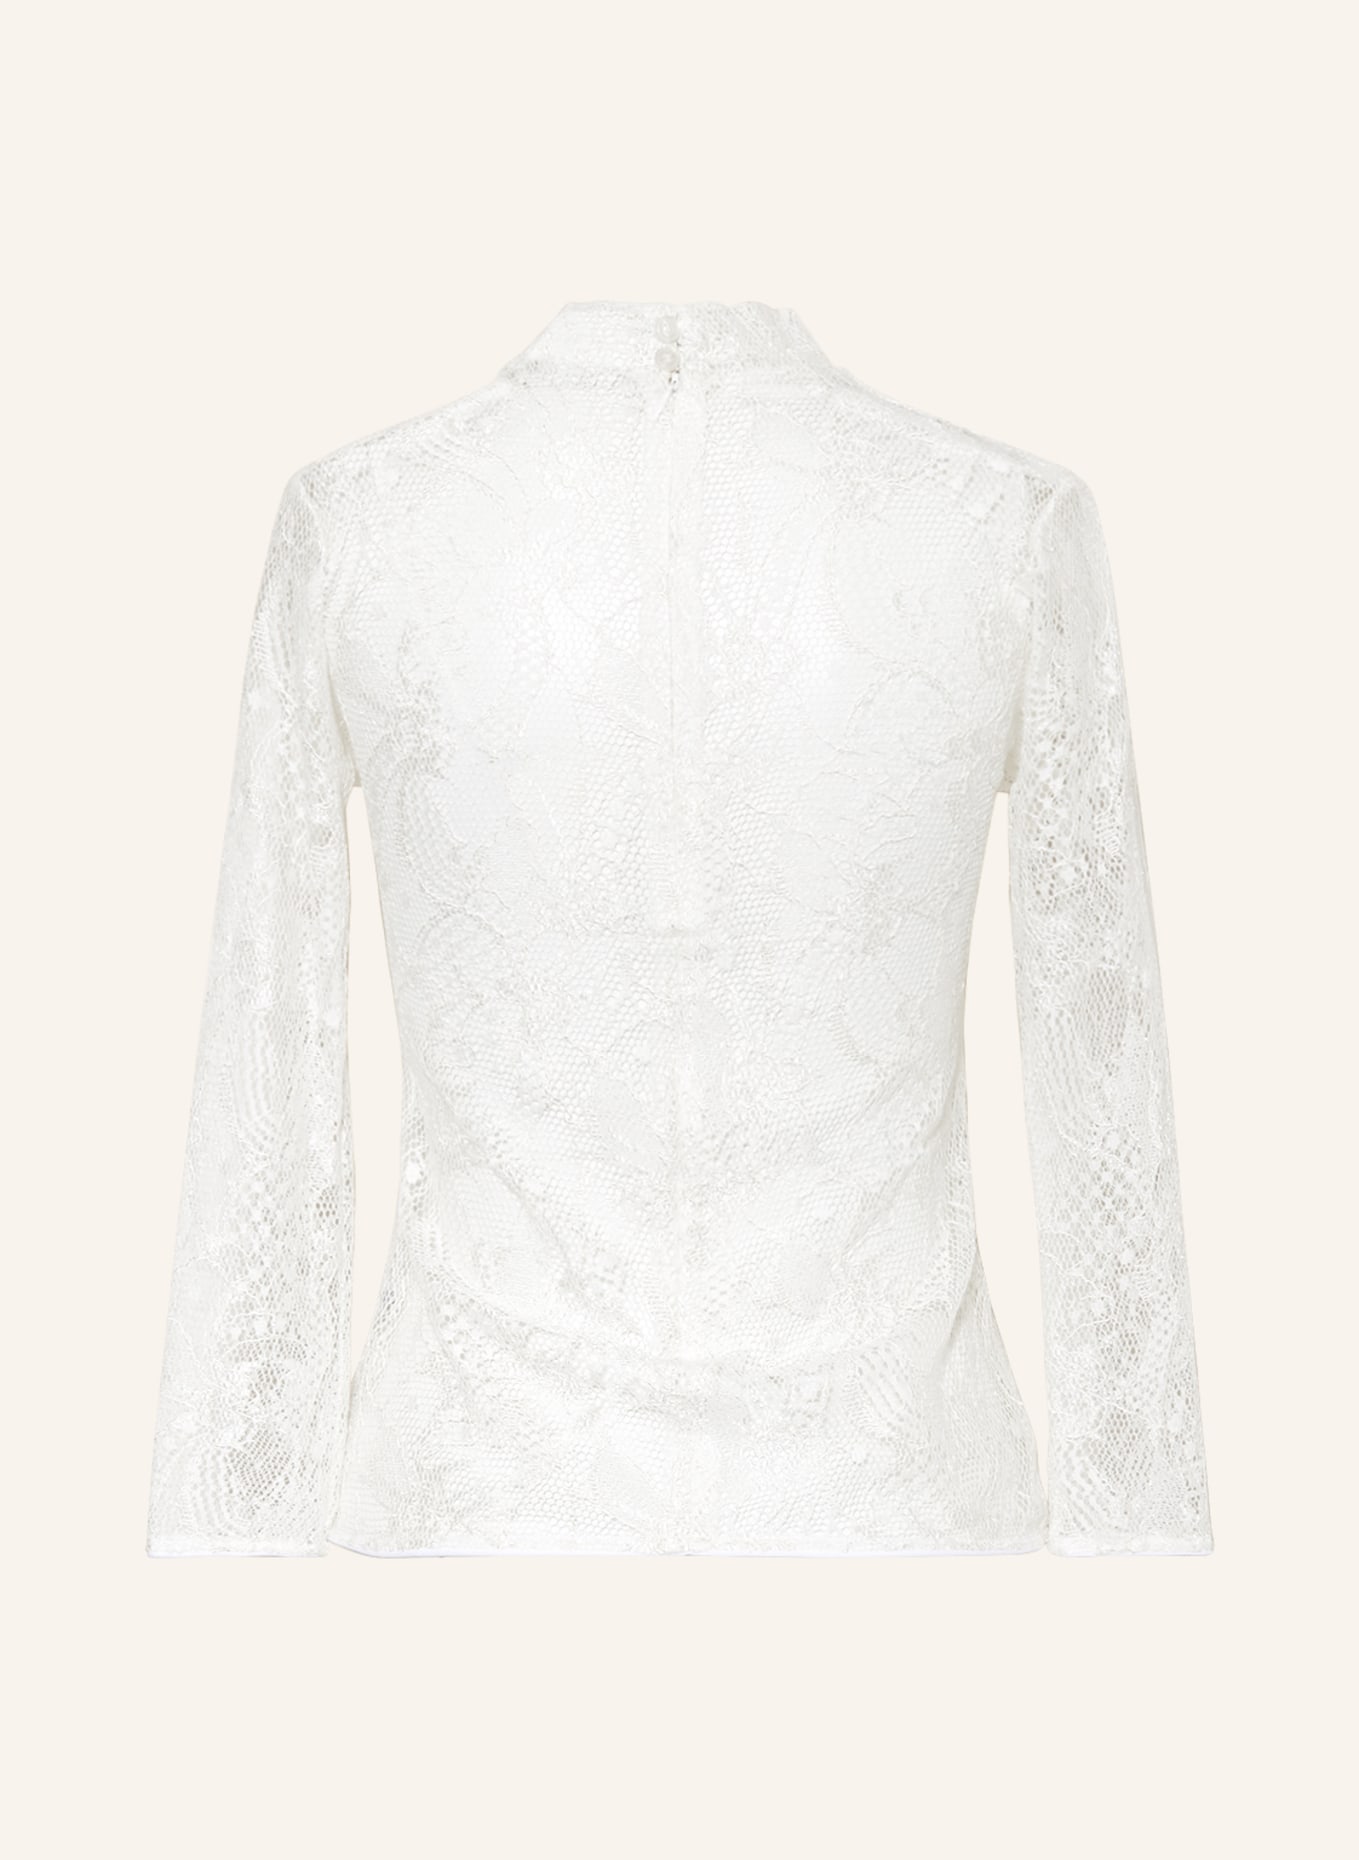 Lipsy all over high neck lace top in white